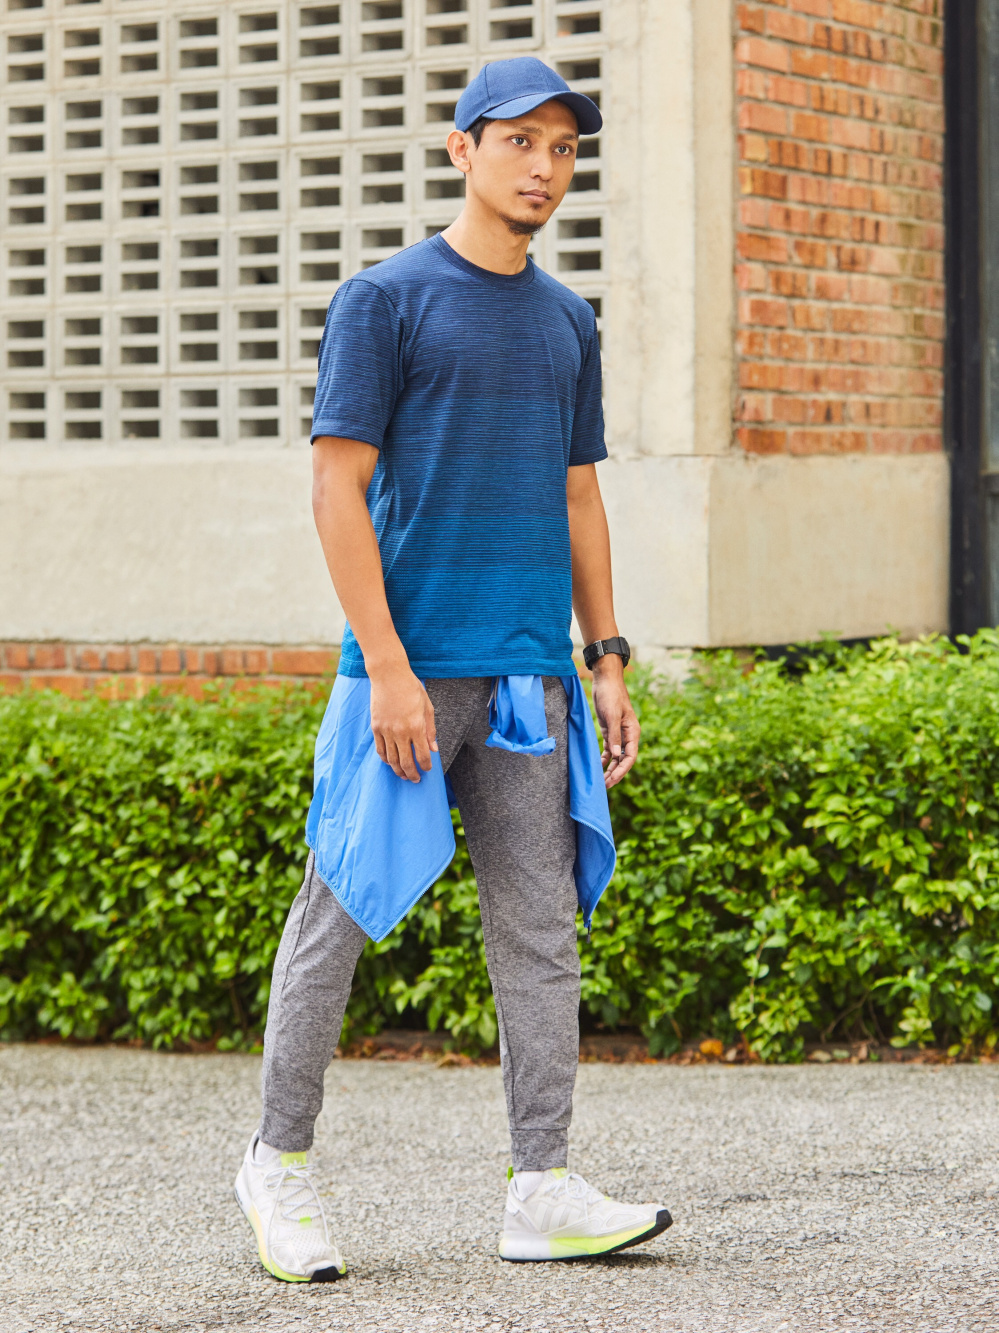 Uniqlo Philippines - Style it with joggers! Our Ultra Stretch